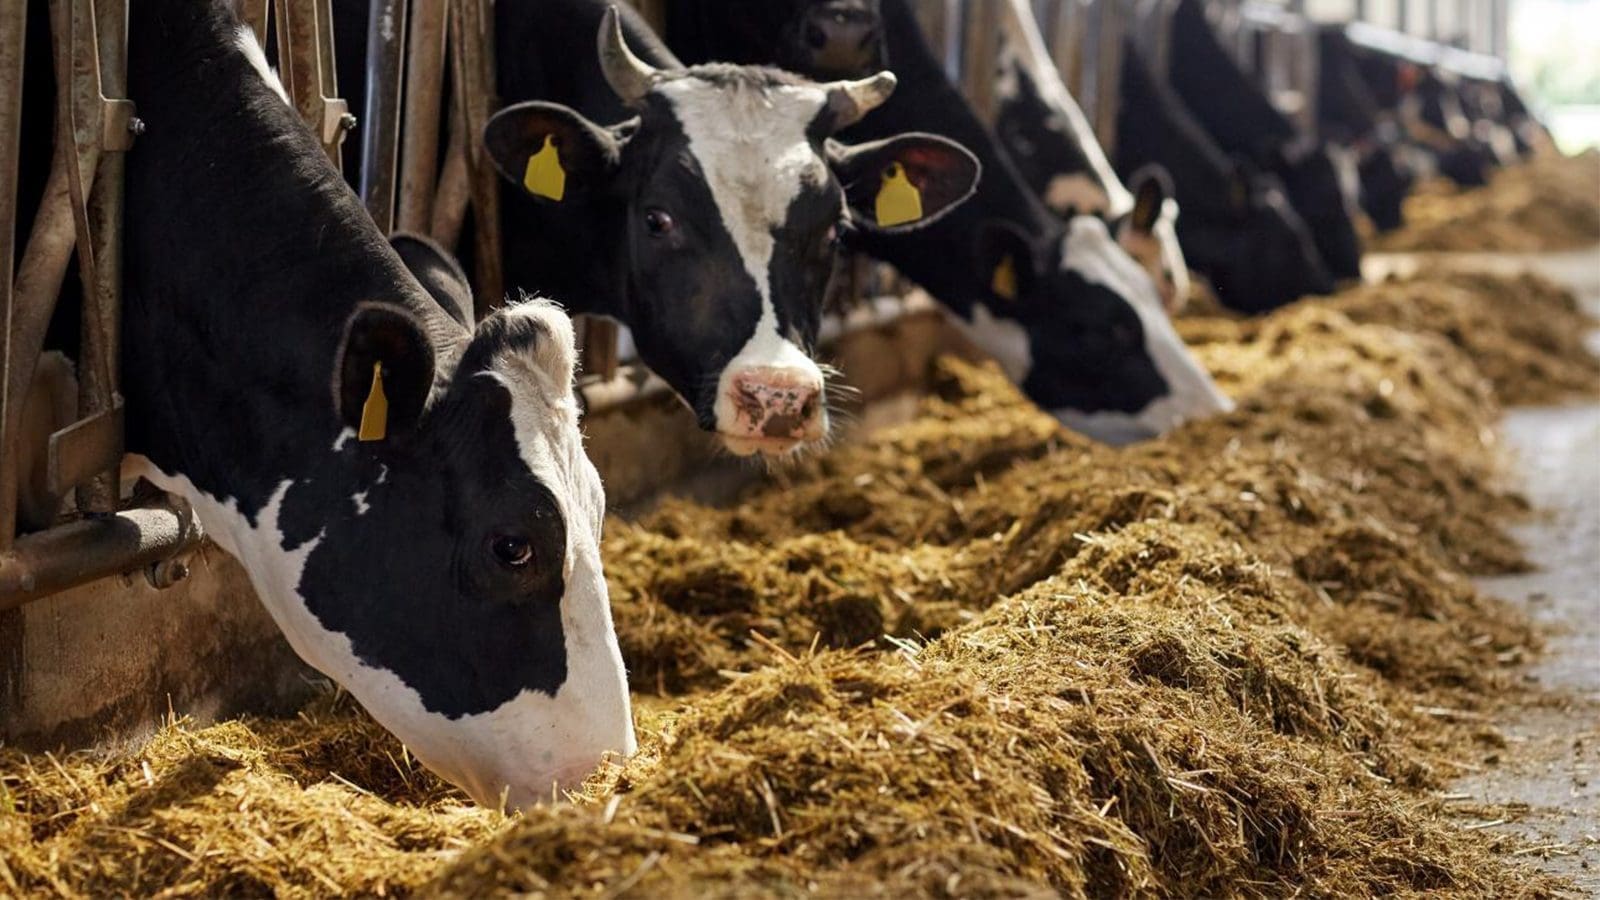 EFSA issues guidance for approval of animal feed detoxification processes